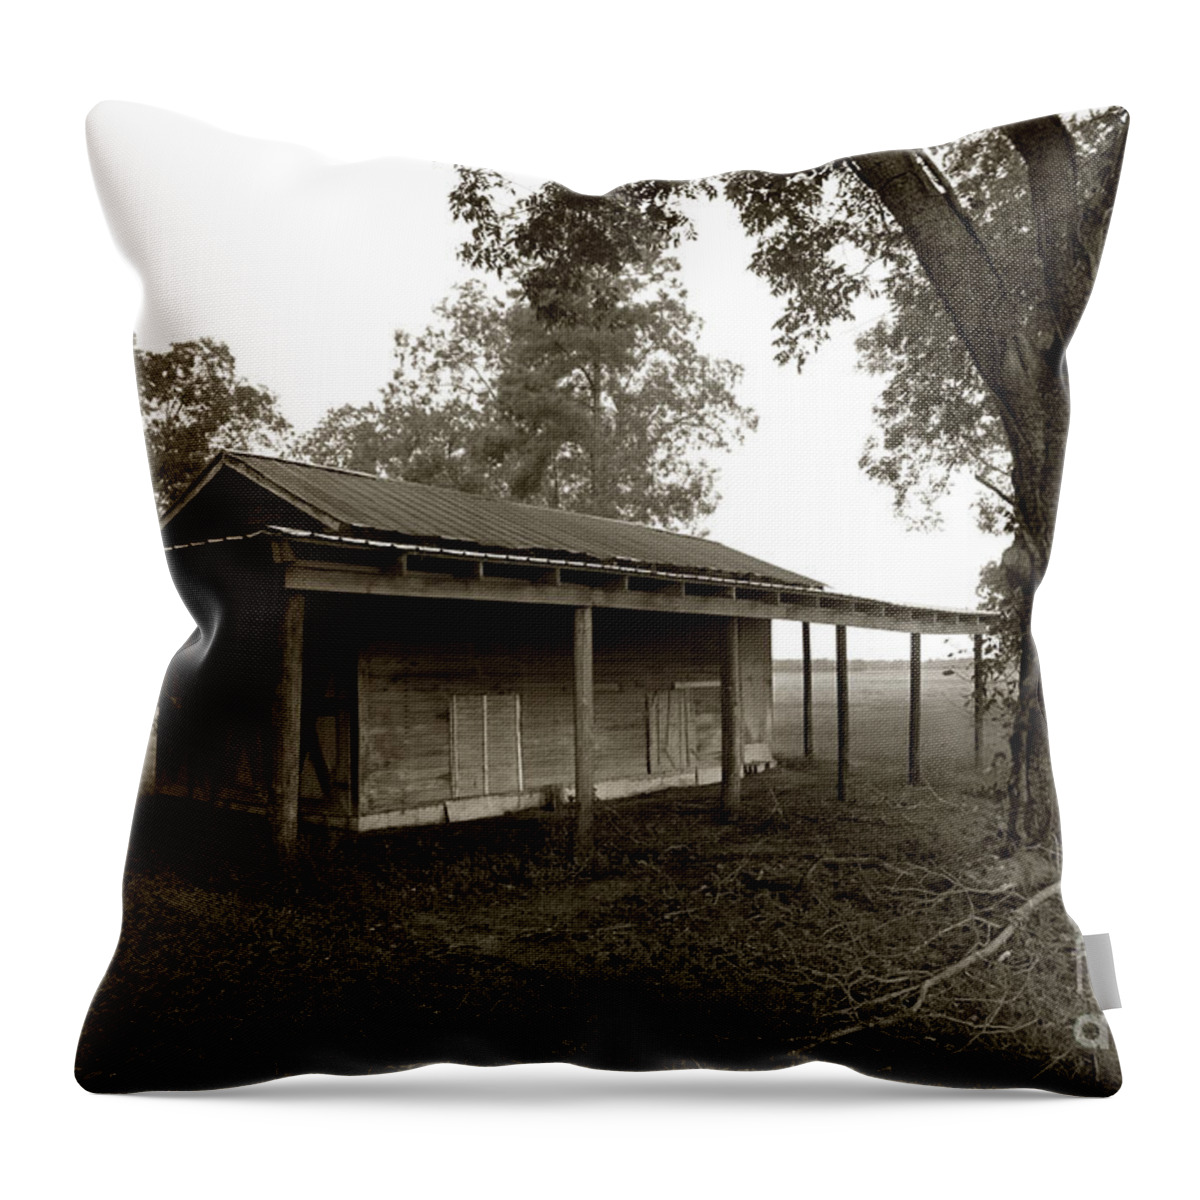 North Carolina Throw Pillow featuring the photograph Horse Shelter by Joseph G Holland